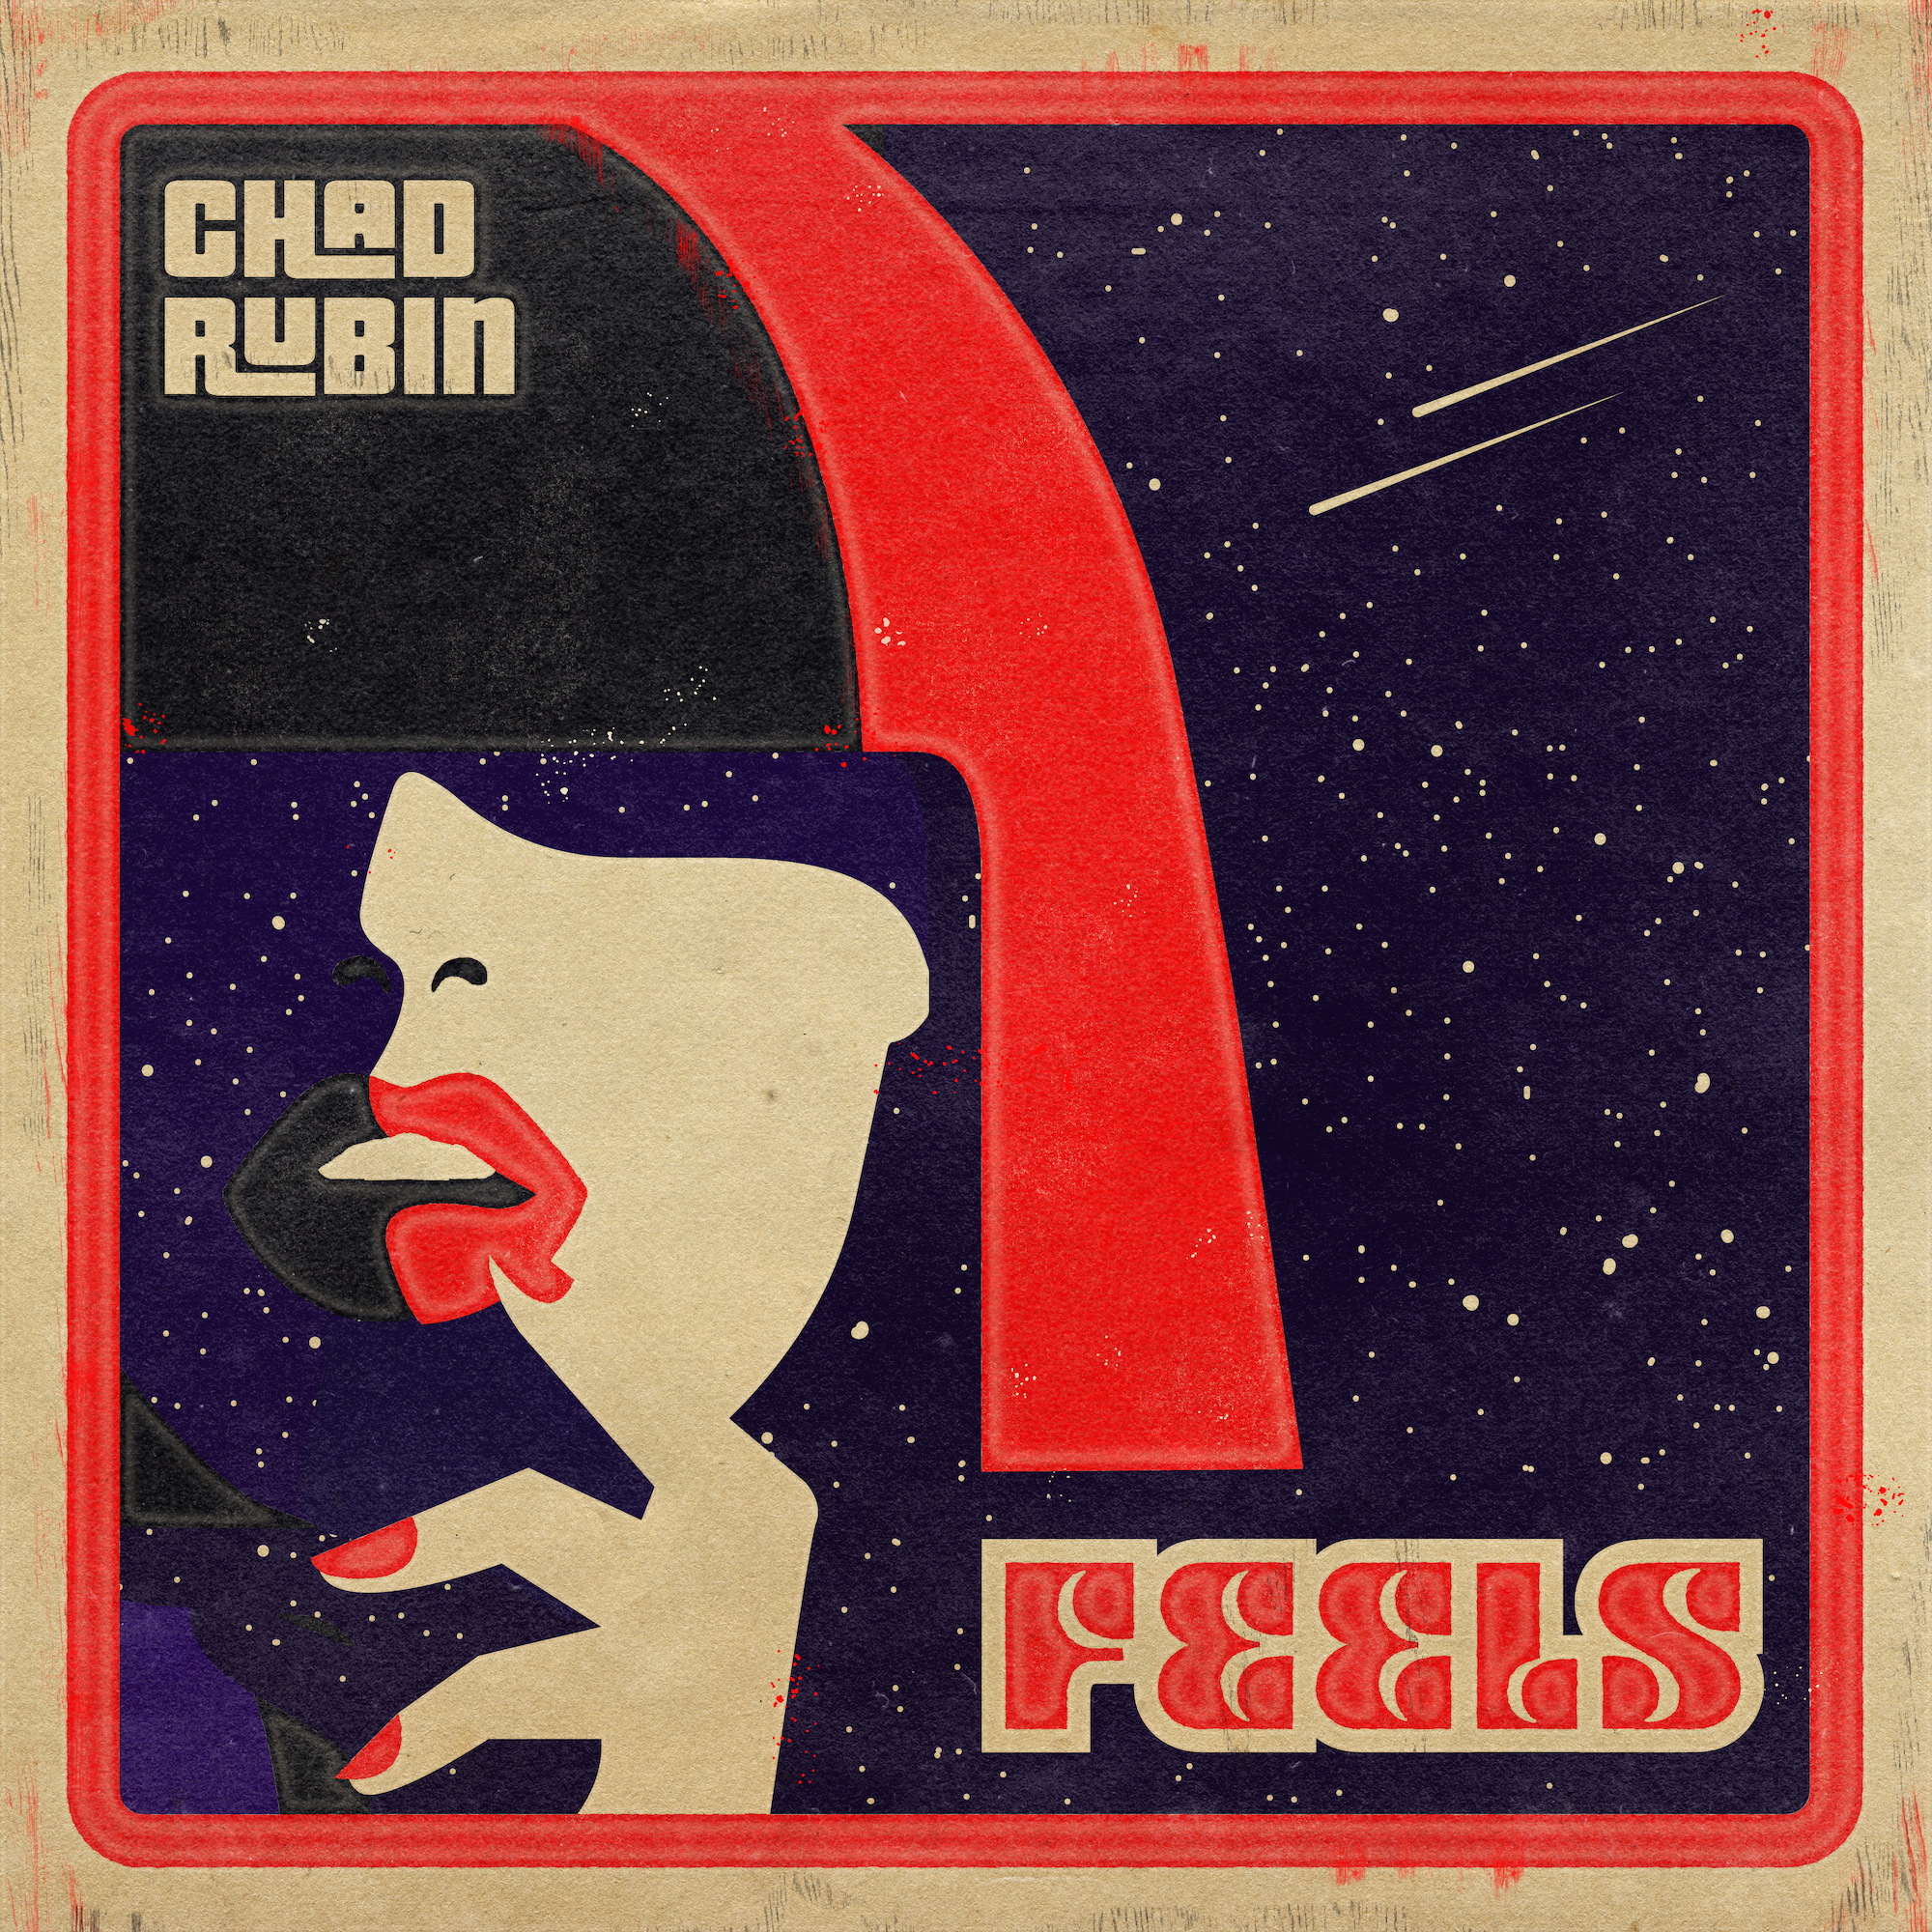 Comprised of 13 songs, ‘Chad Rubin’ releases brand new studio album ‘Feels’.